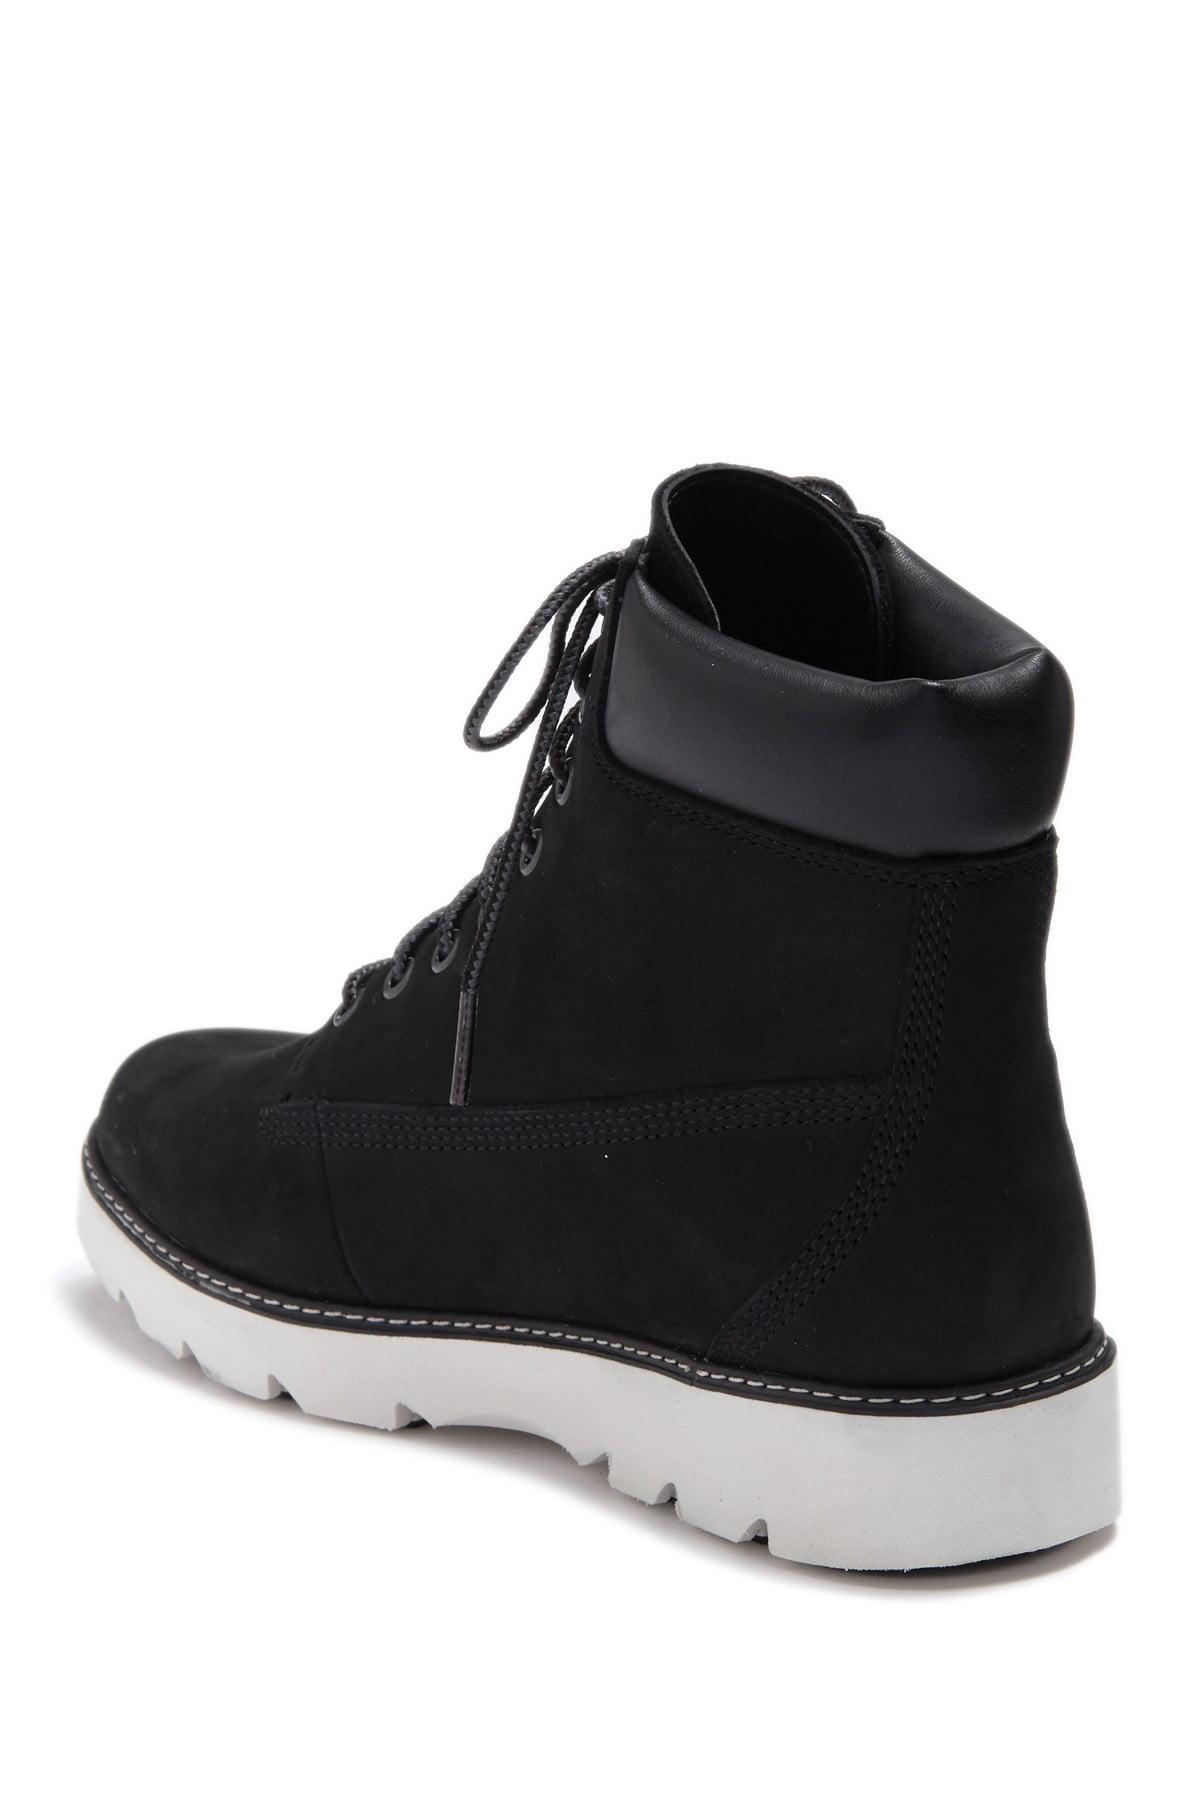 Buy > keeley timberland > in stock